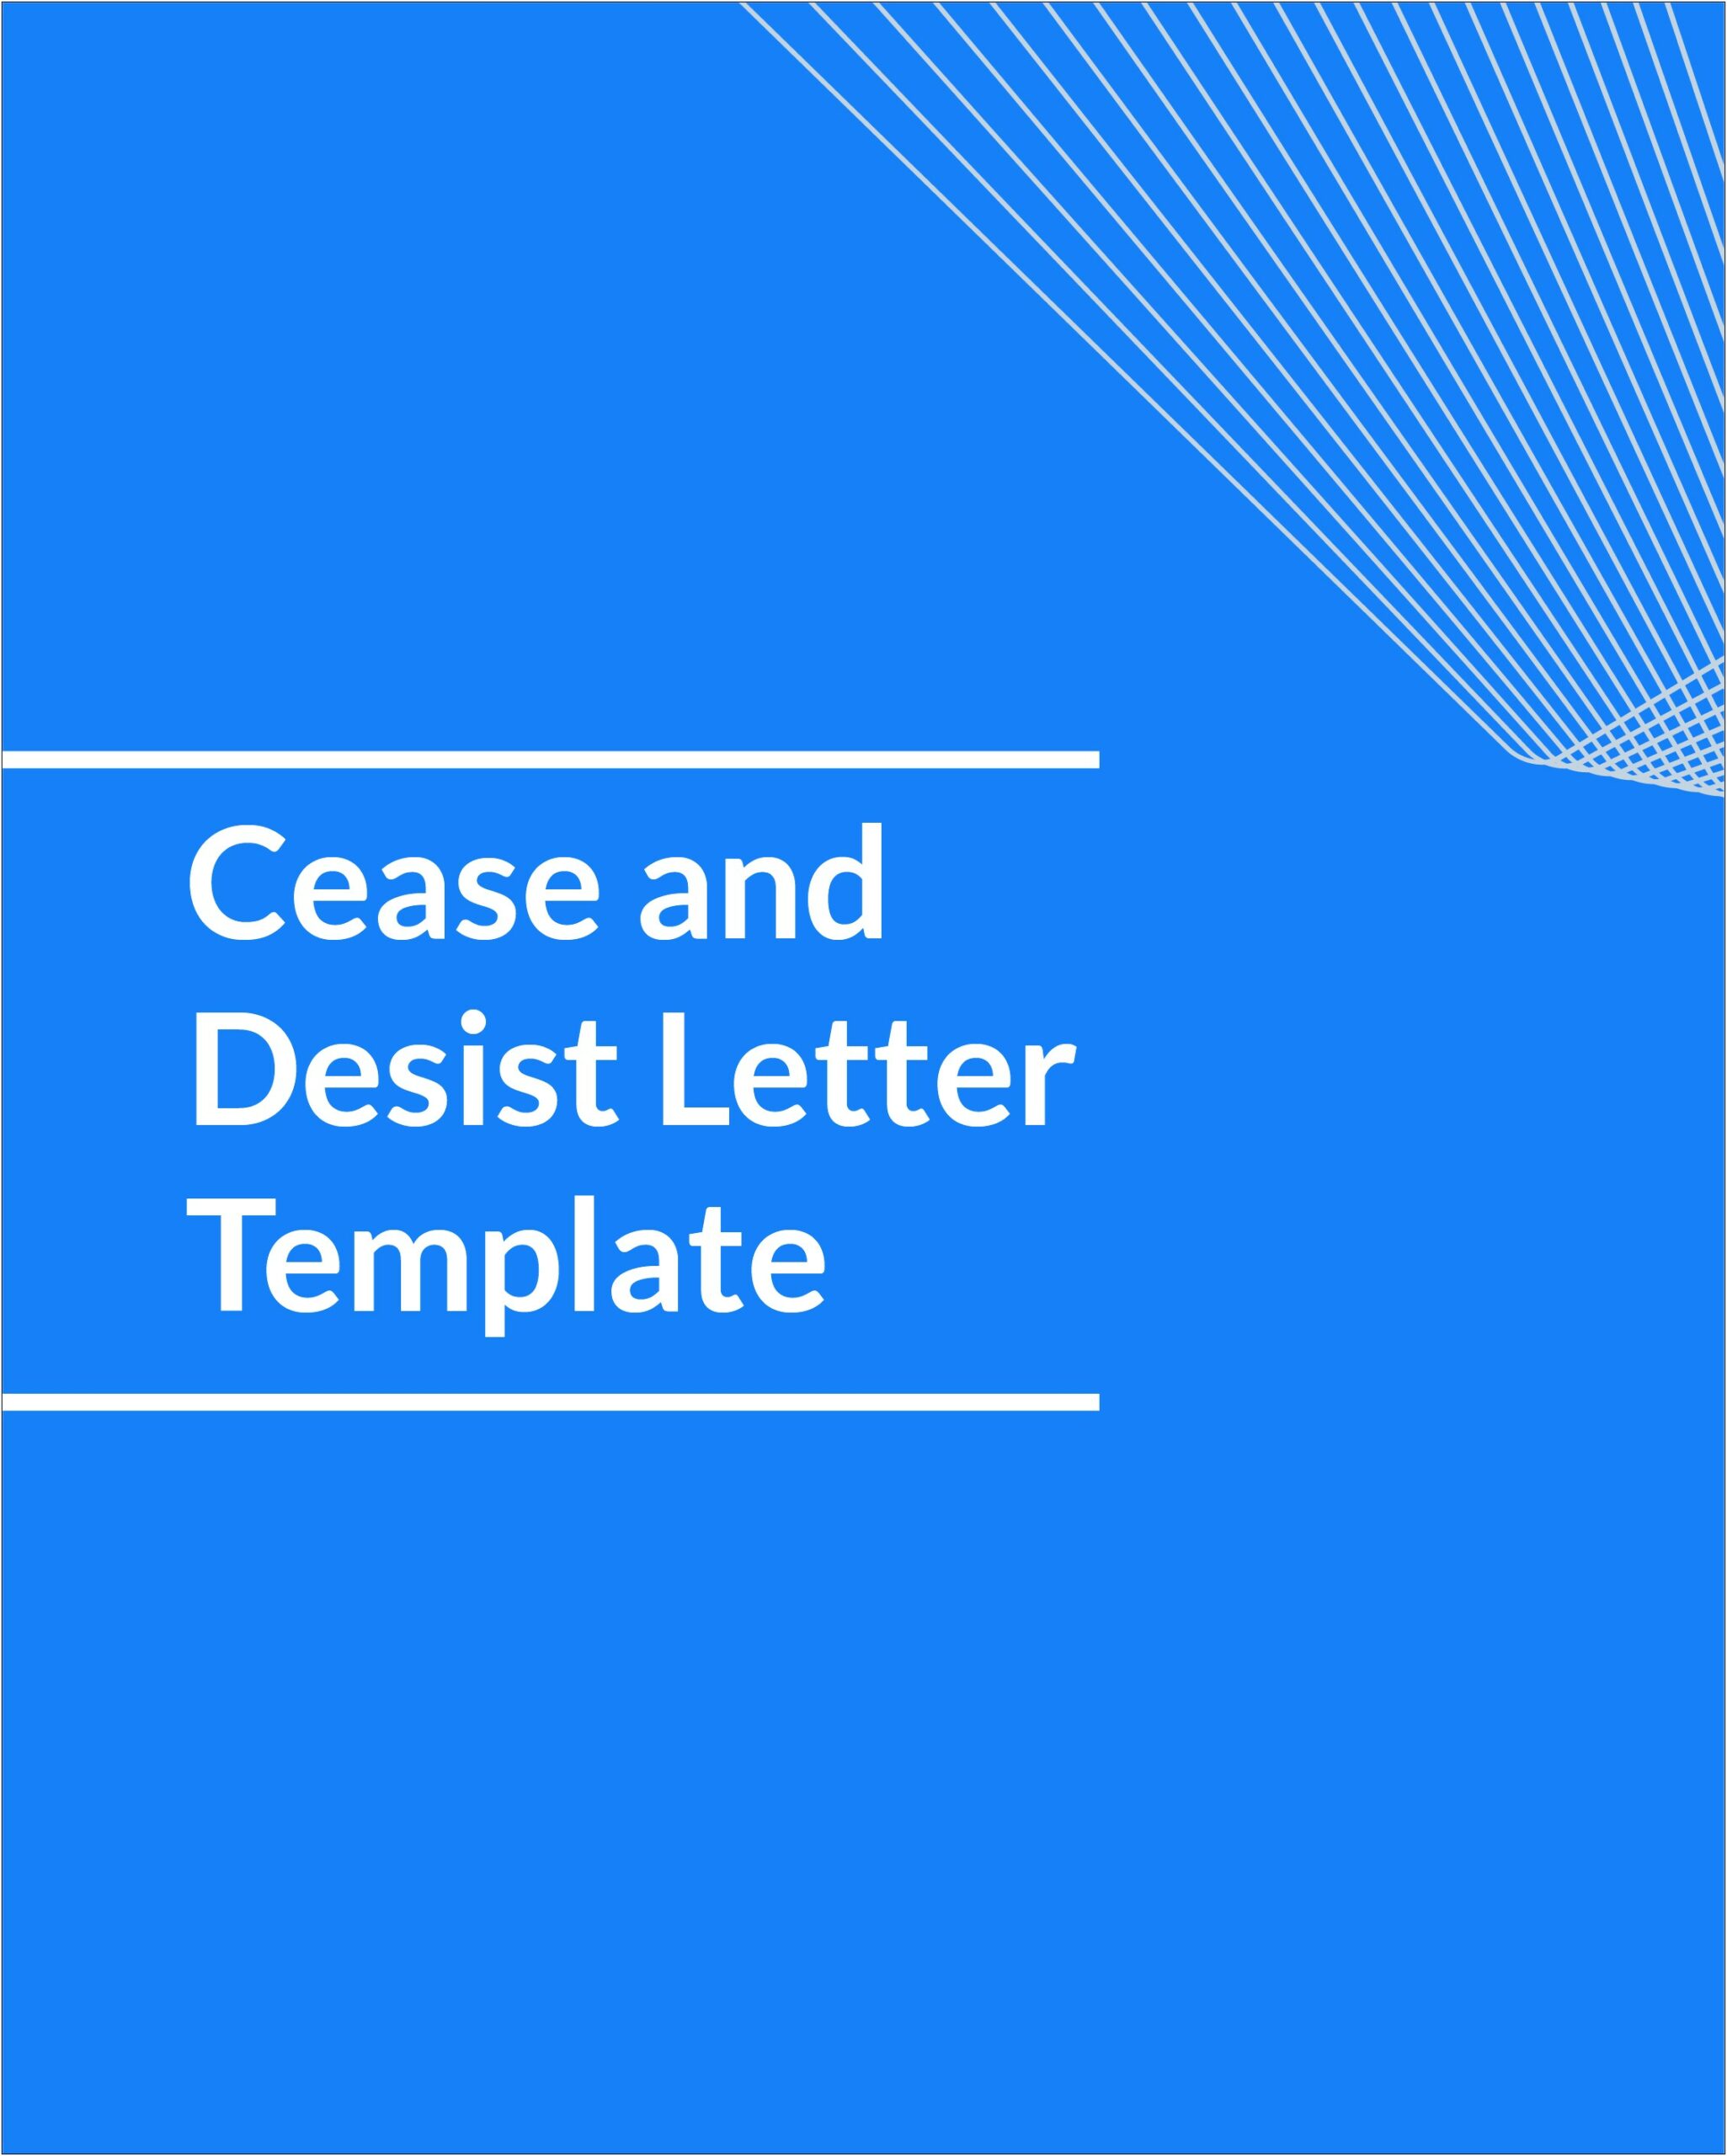 Cease And Desist Letter Breach Of Contract Template